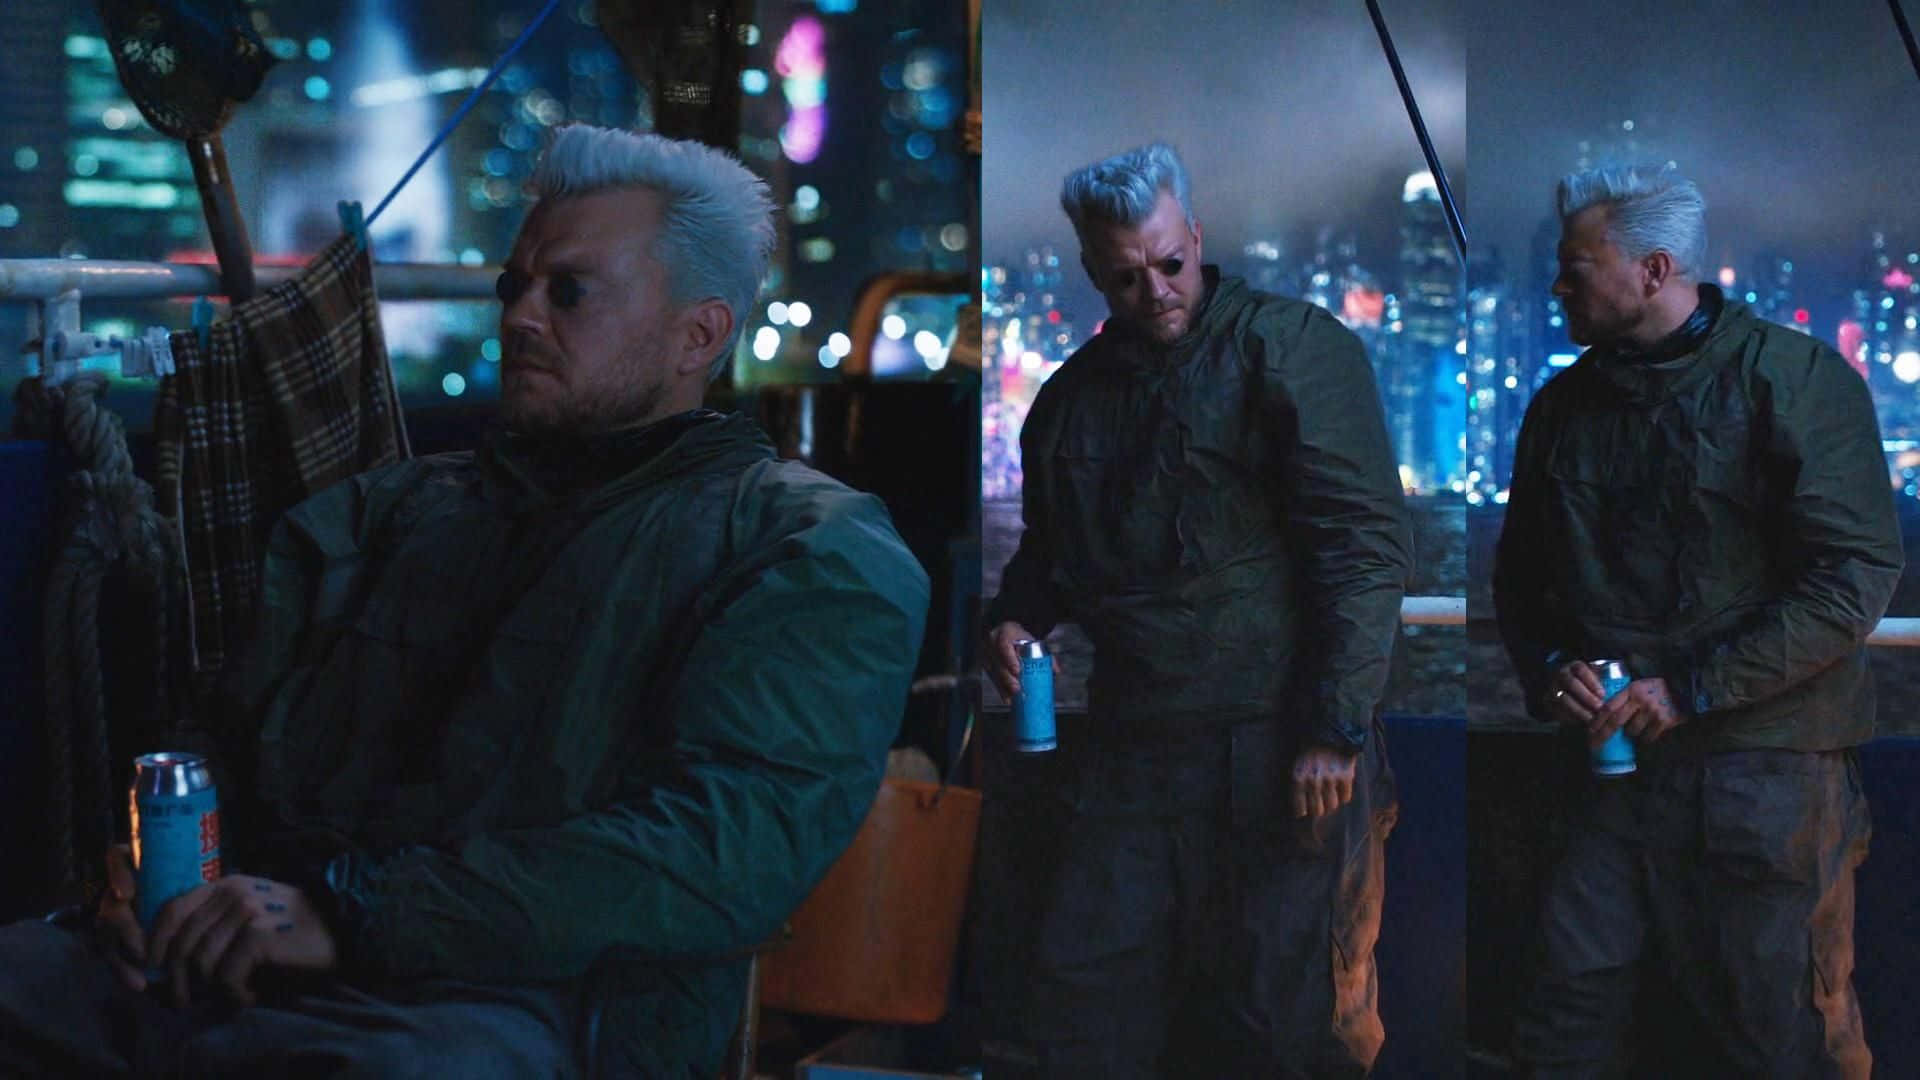 Batou, the cyborg detective from Ghost in the Shell Wallpaper